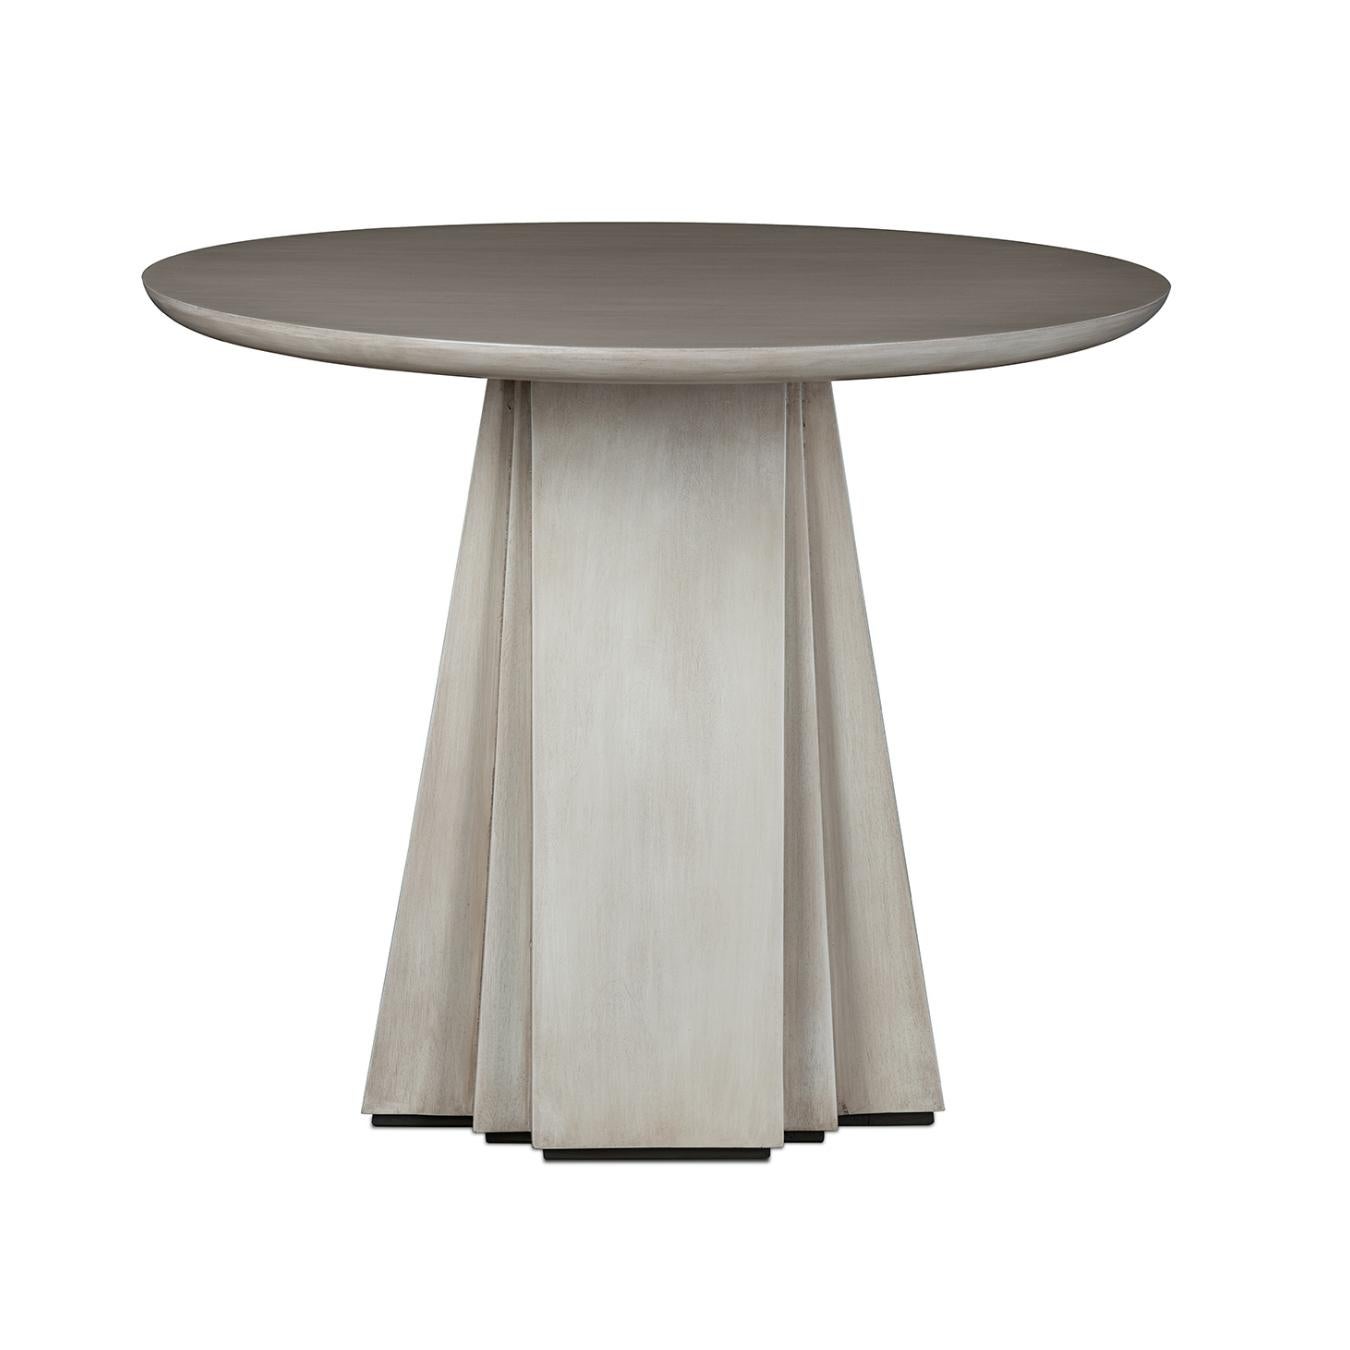 The Rochelle lamp table has a geometric base which leads to an symmetrical beech wood table top. The design is simple but stands out due to the detailing on molding on the table top and sleekness of the base.
 